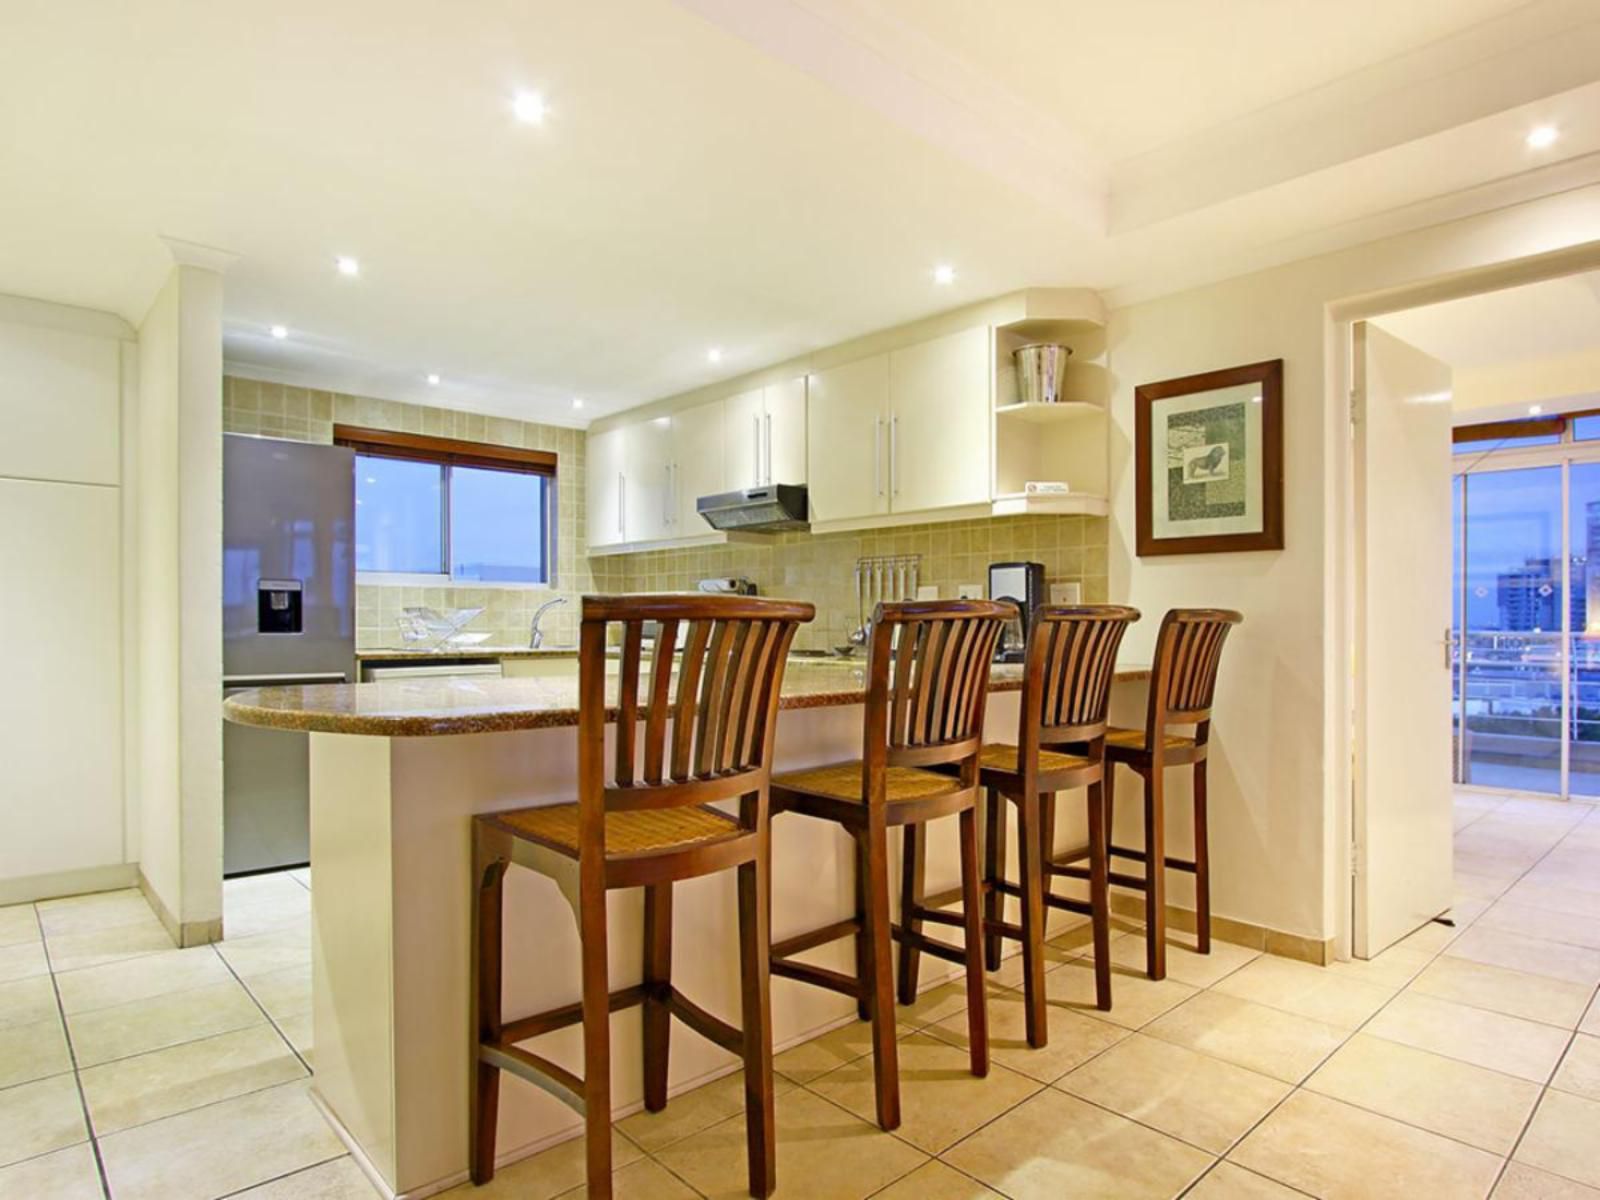 Ocean View C602 By Hostagents Bloubergstrand Blouberg Western Cape South Africa Kitchen